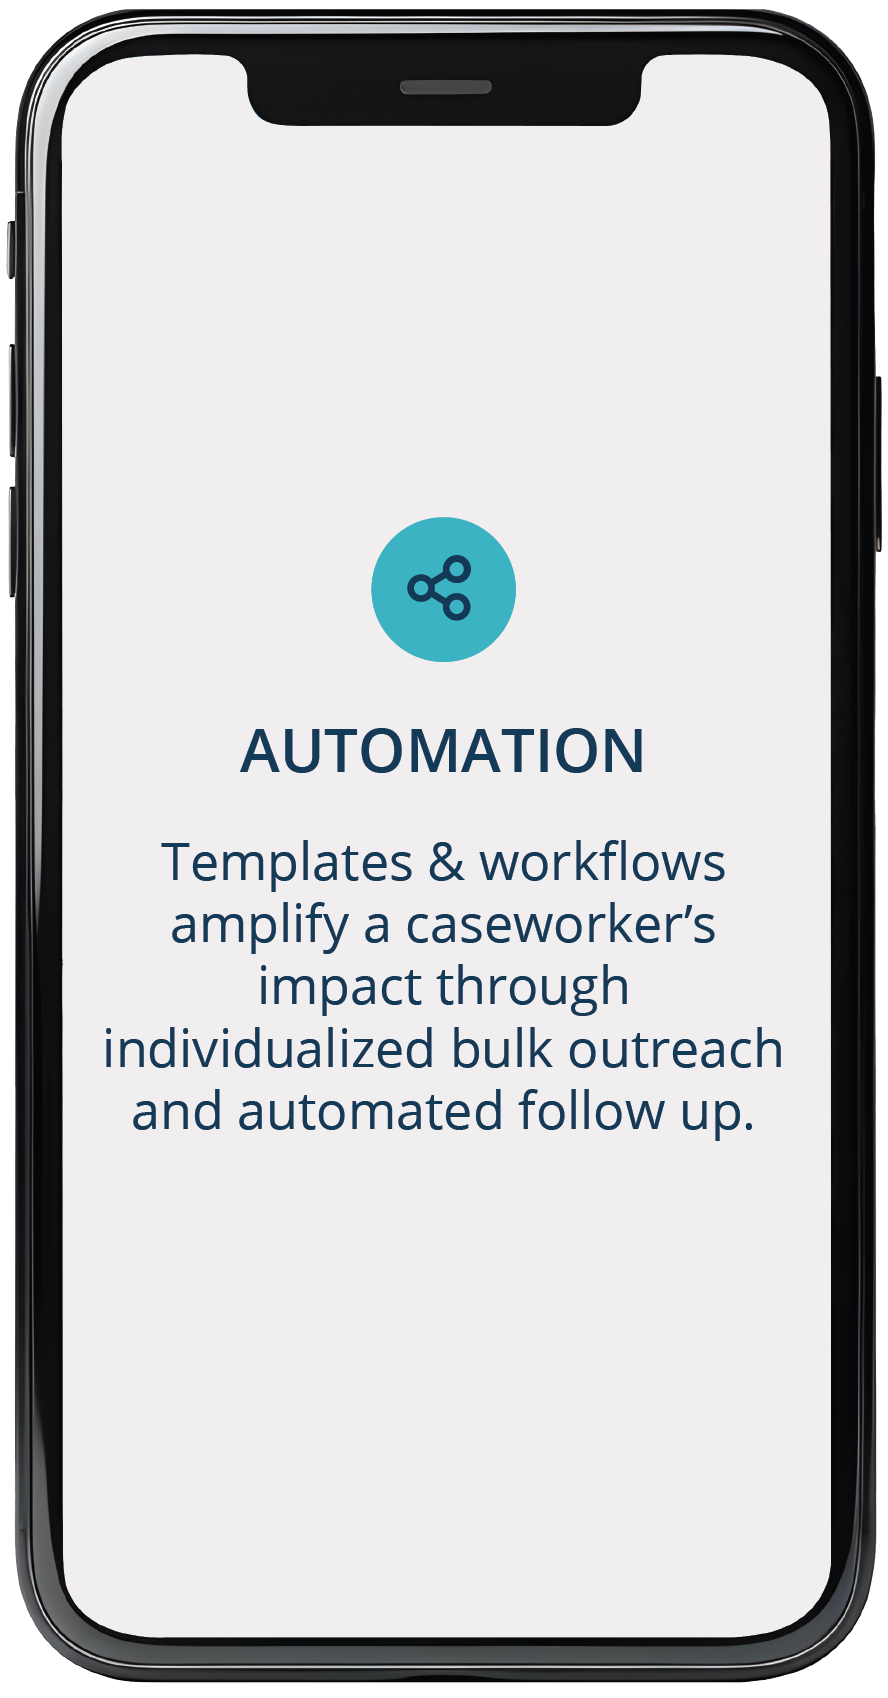 Templates & workflows amplify a caseworker’s impact through individualized bulk outreach and automated follow up.